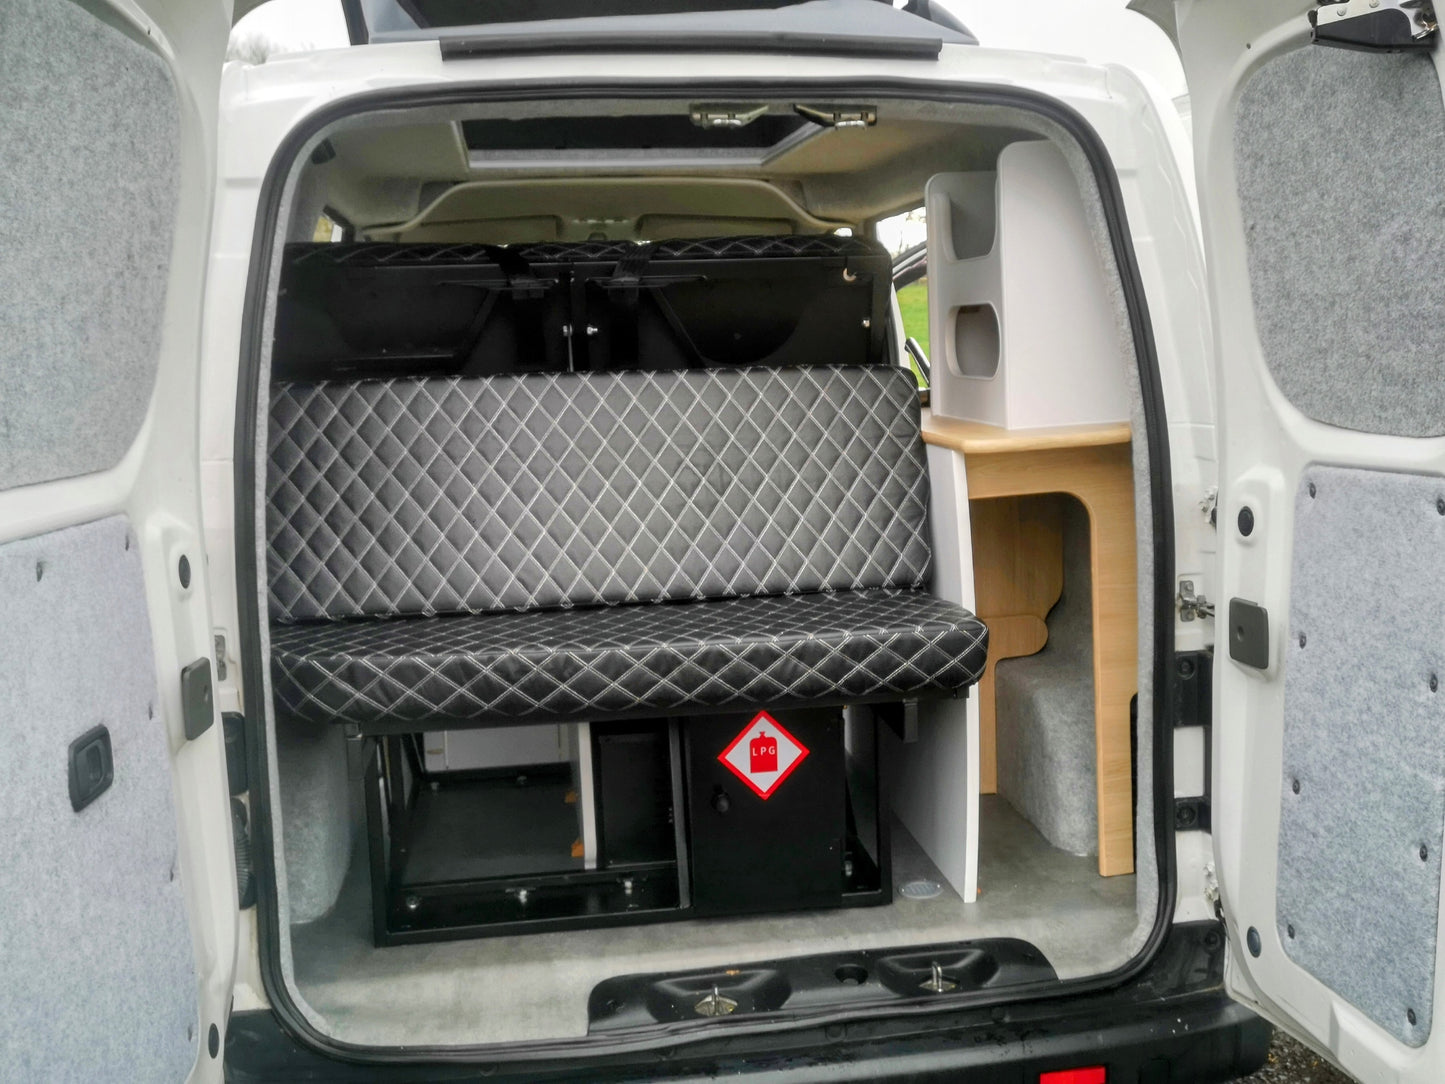 CCCAMPERS Escape Camper Conversion for Nissan NV200 & eNV200, Maxus eDeliver 3 also the XS wheelbase Peugeot Expert, Citroen Dispatch and Toyota Proace